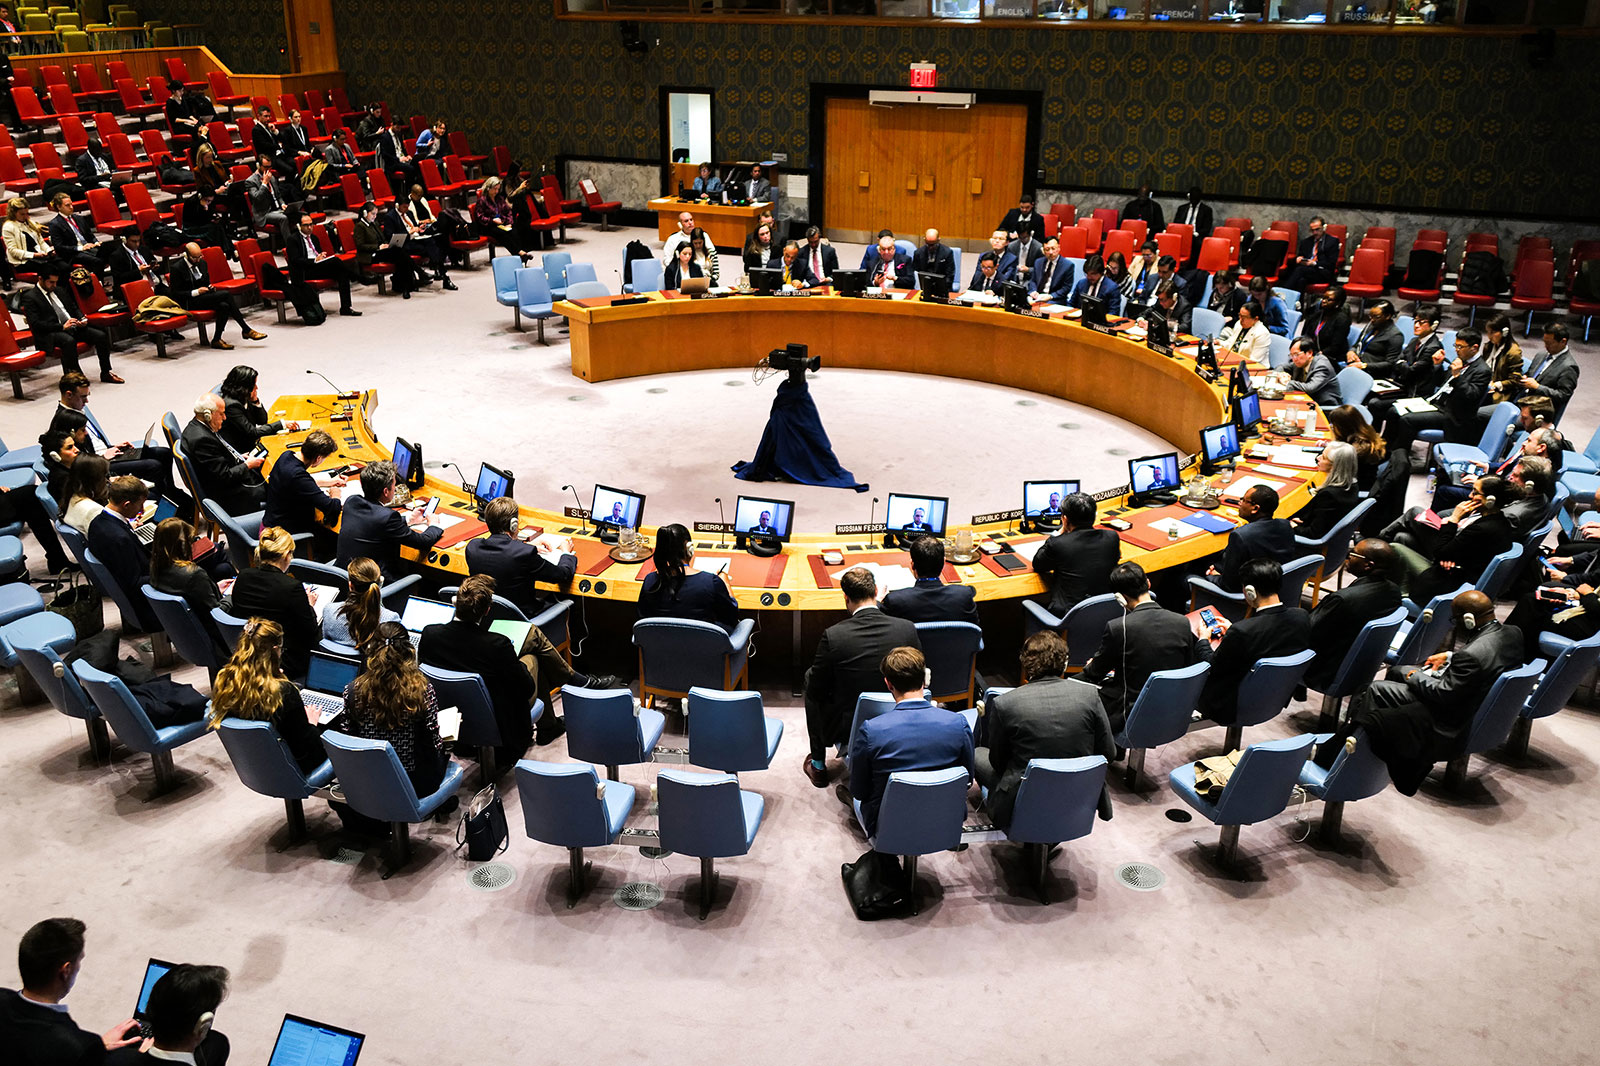 The UN Security Council holds a meeting at UN headquarters in New York on Friday.